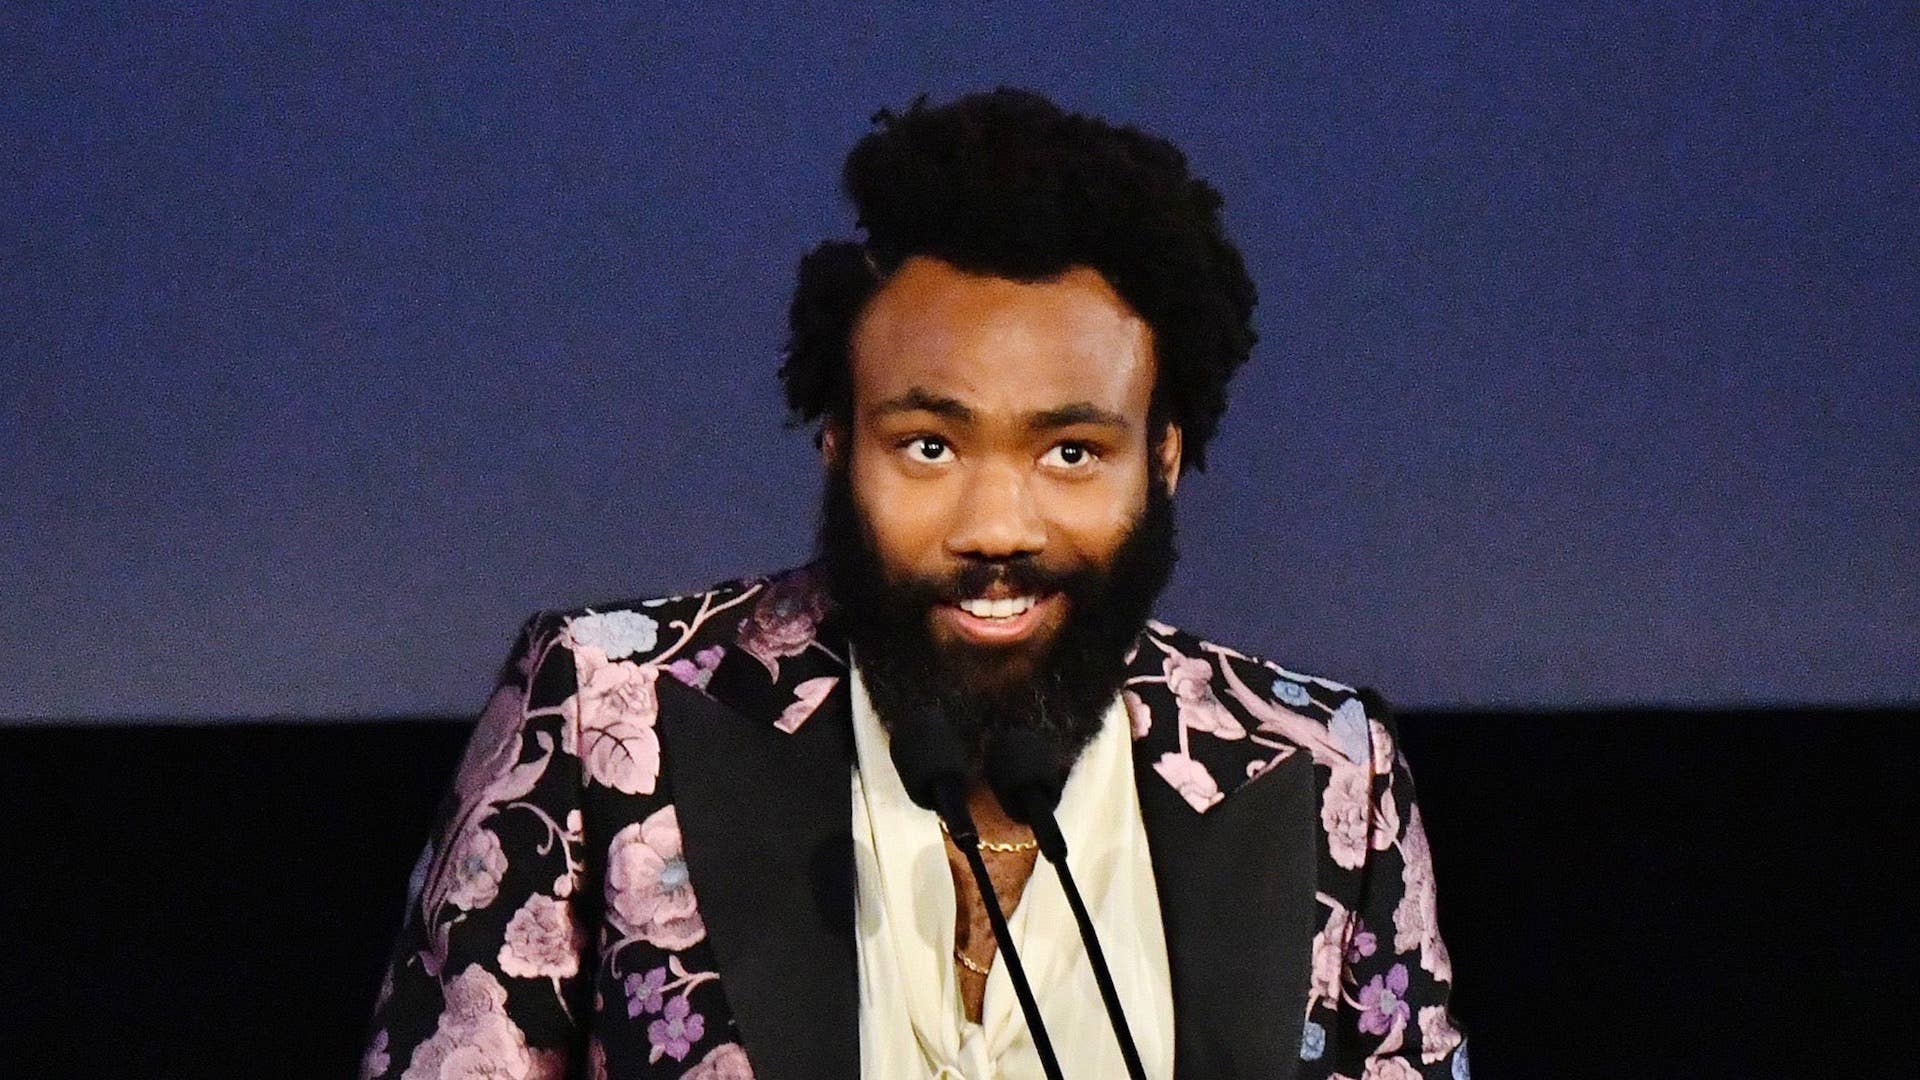 Donald Glover, wearing Gucci, speaks onstage during the 2019 LACMA Art + Film Gala